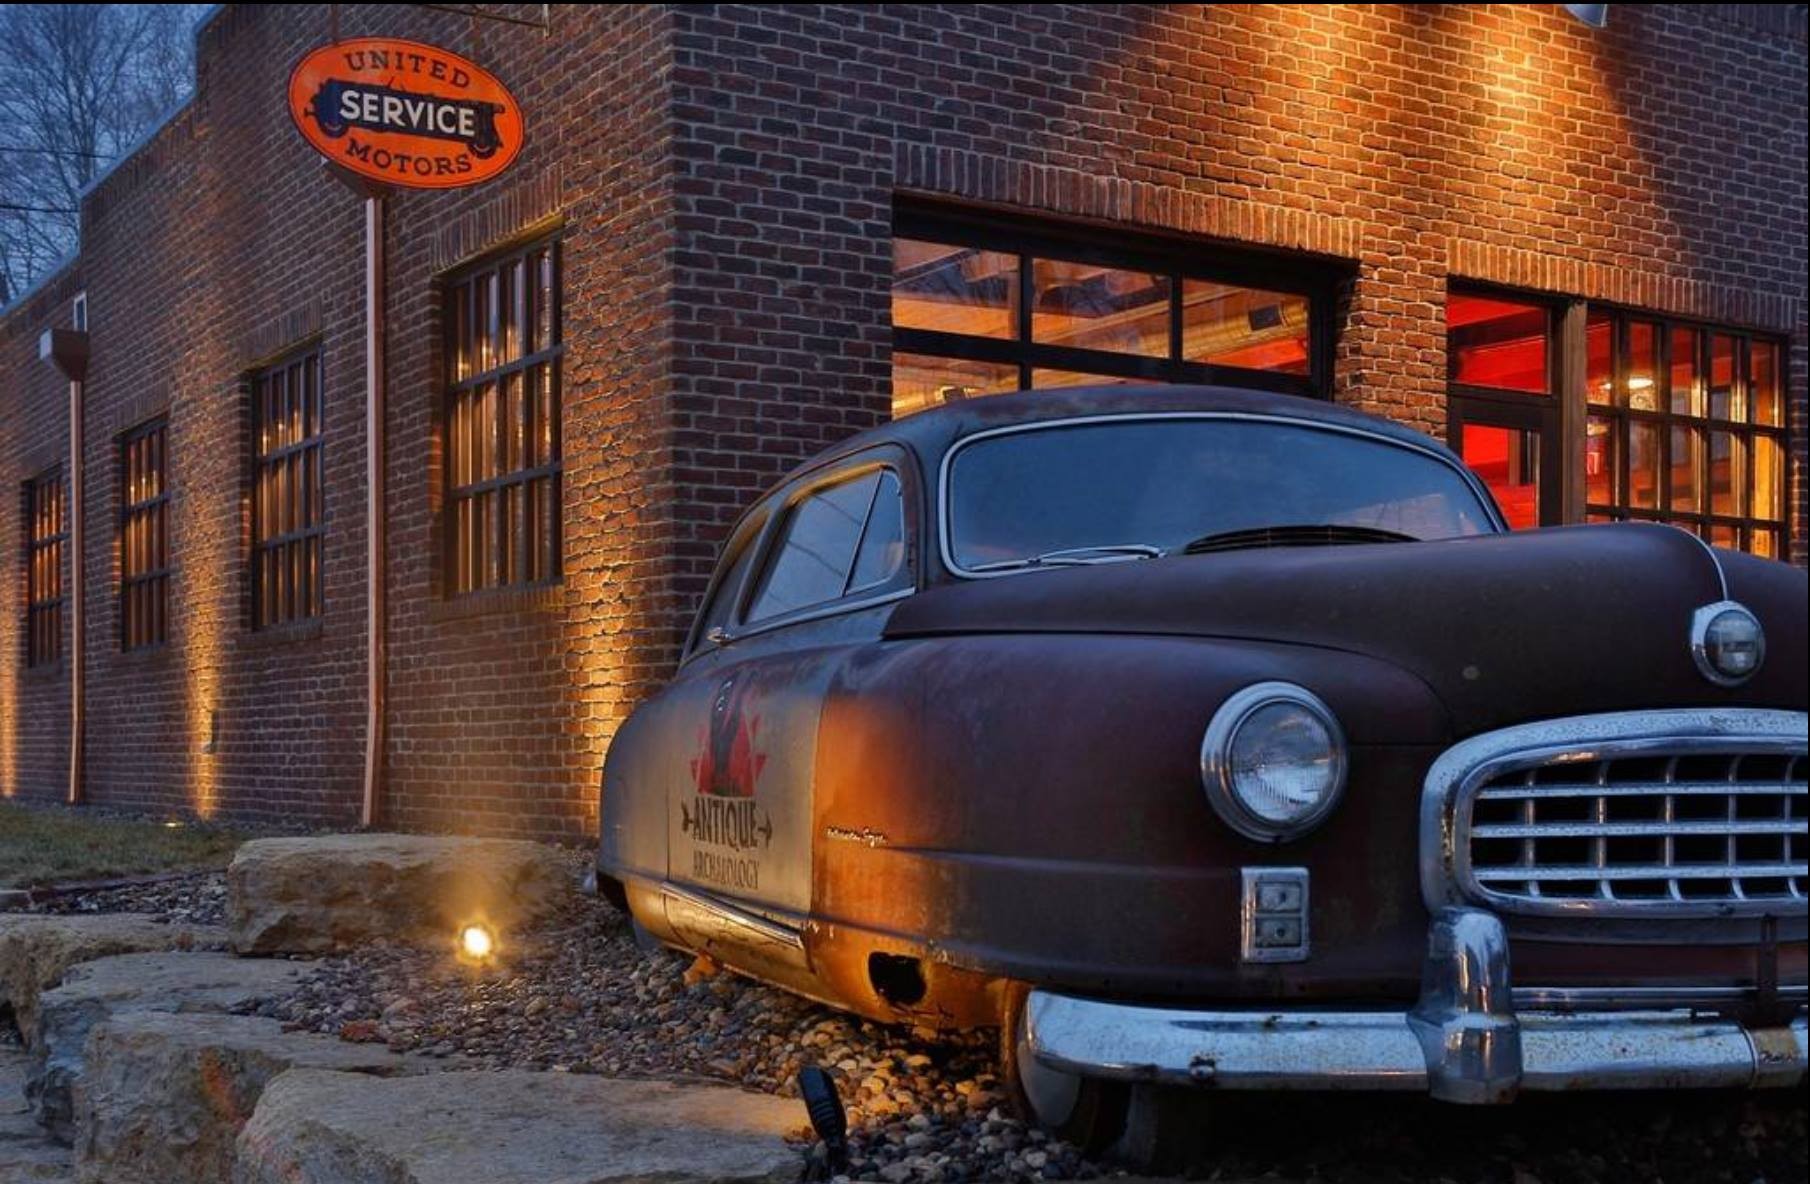 American Pickers Wallpapers